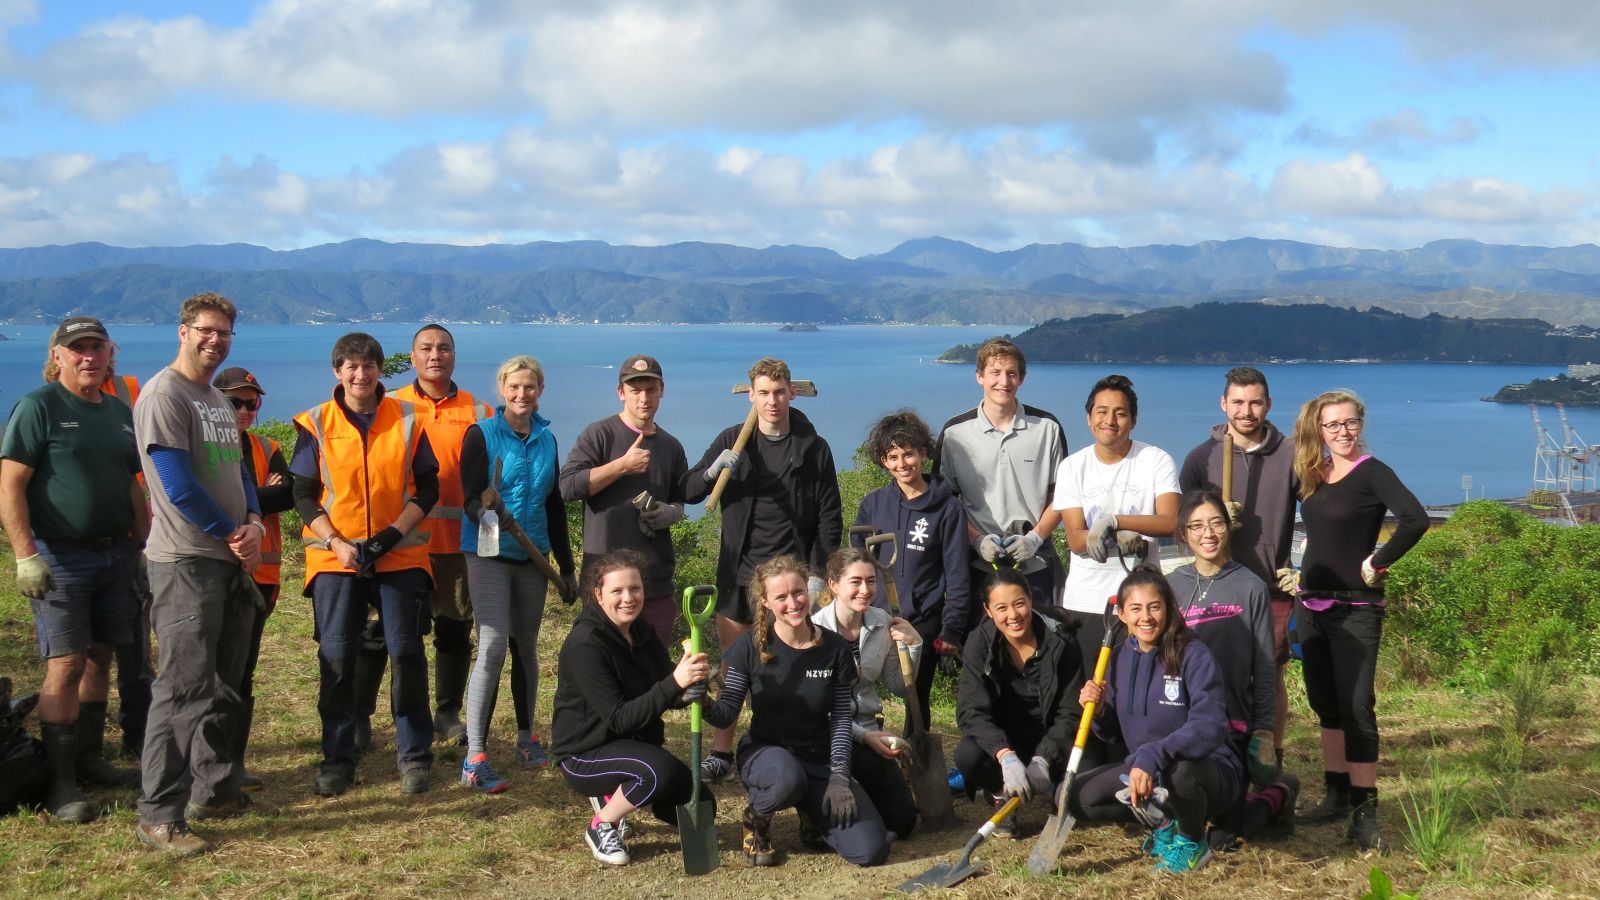 A group of student volunteers, hold landscaping tools while posing together on a hill with the ocean in the background.